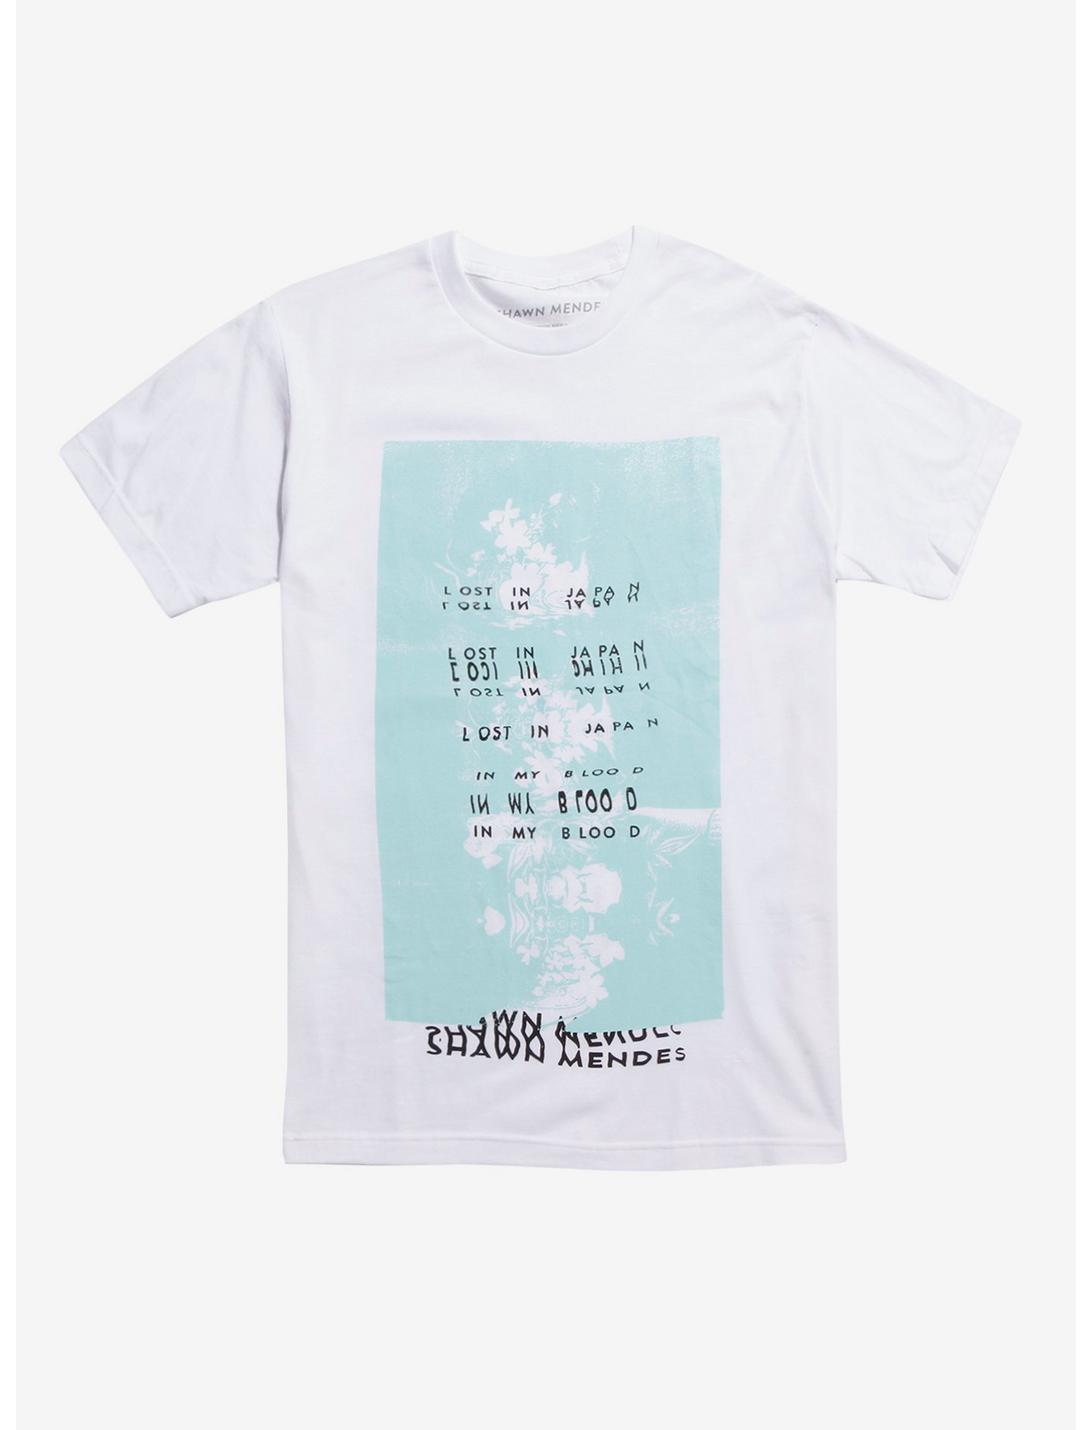 Shawn Mendes Lost In Japan In My Blood T-Shirt, WHITE, hi-res